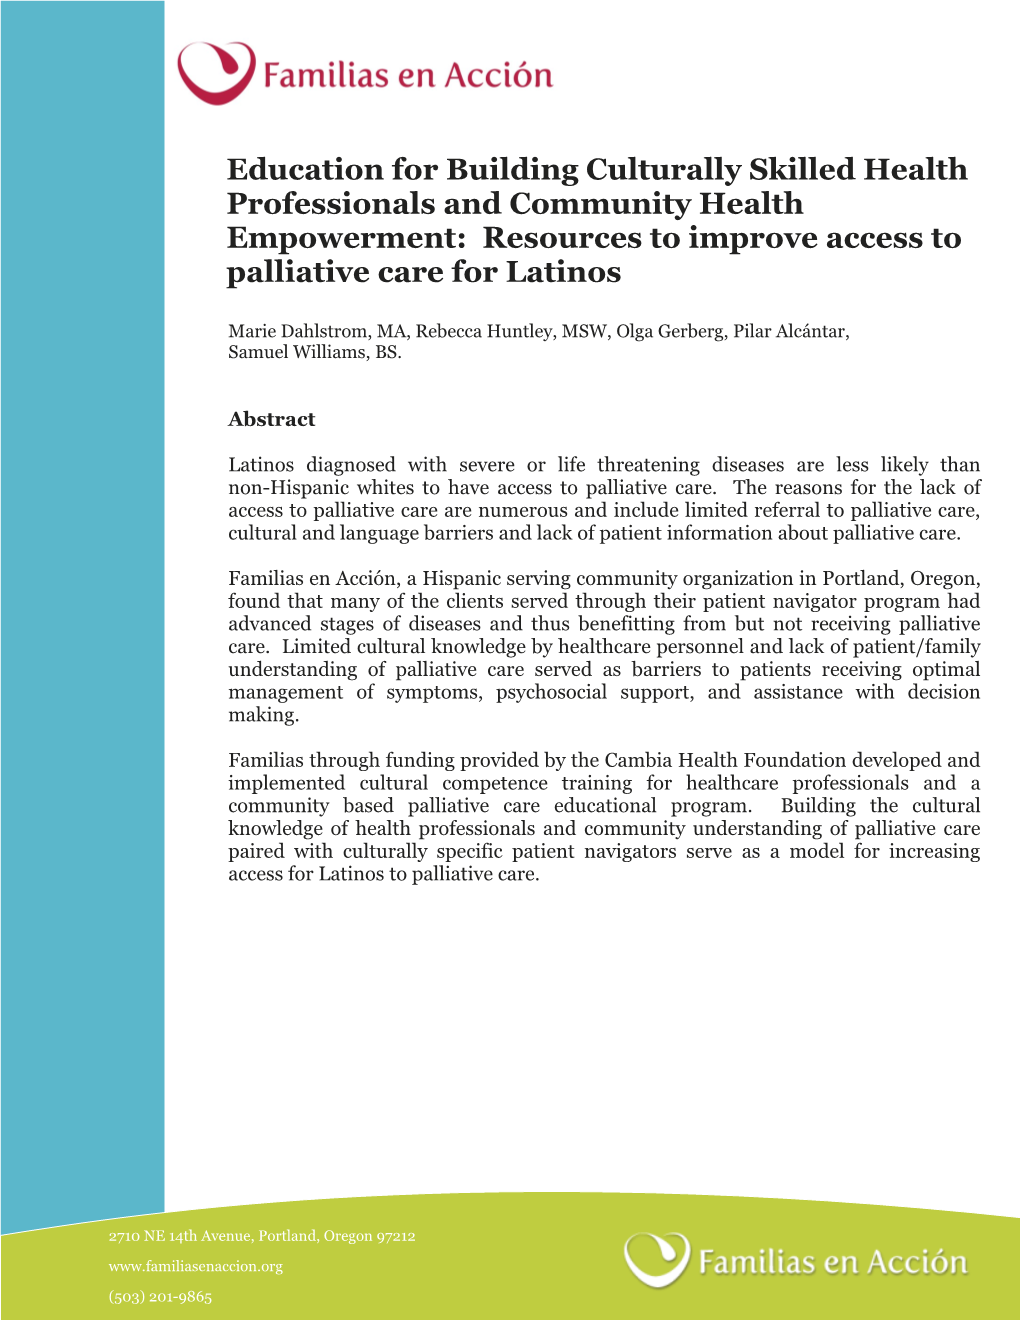 Education for Building Culturally Skilled Health Professionals and Community Health Empowerment: Resources to Improve Access to Palliative Care for Latinos